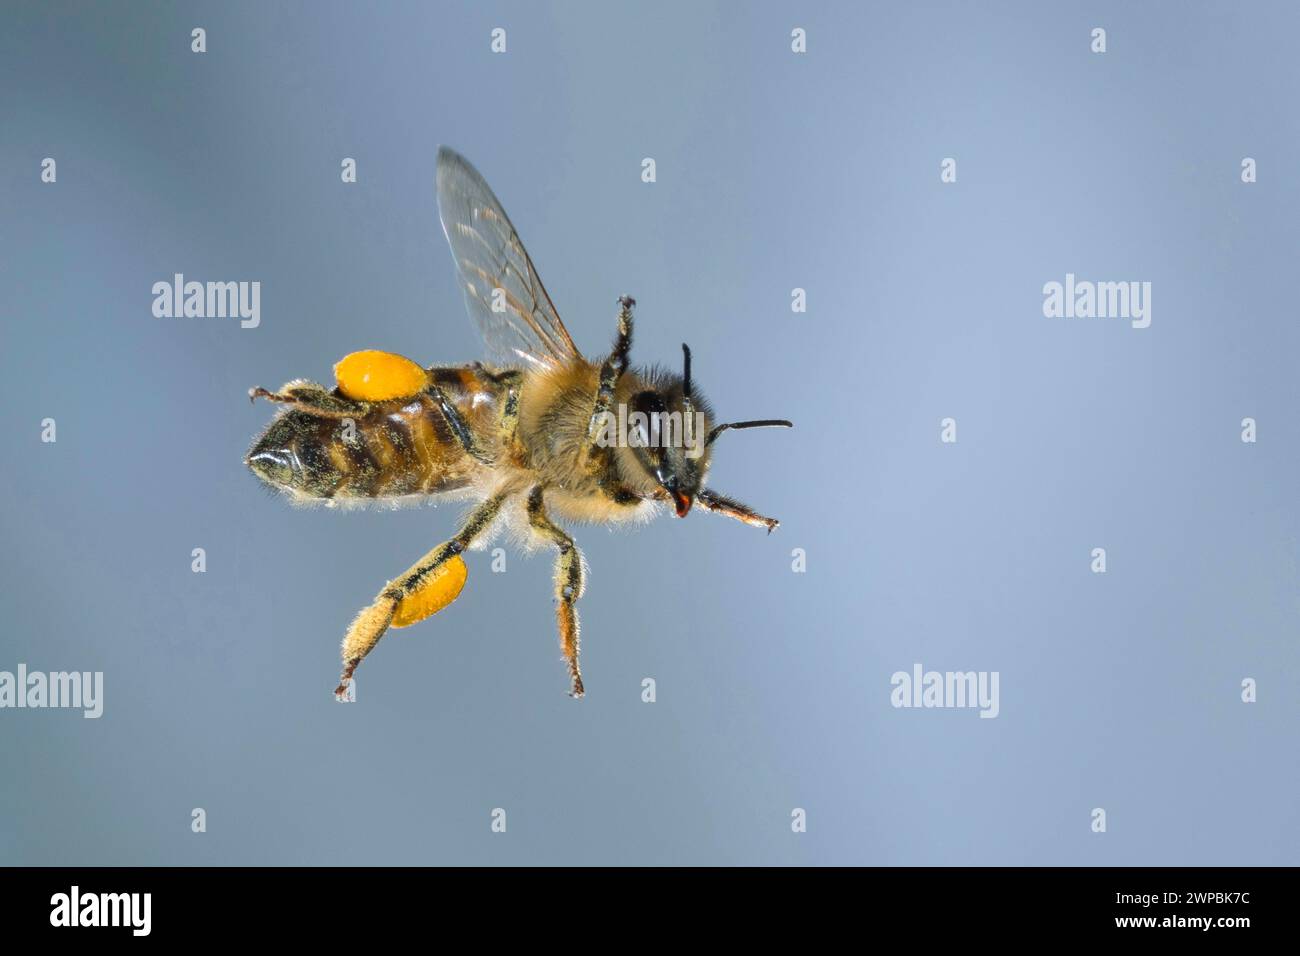 honey bee, hive bee (Apis mellifera mellifera), in flight, with pollen loads, High-speed photography, Germany Stock Photo